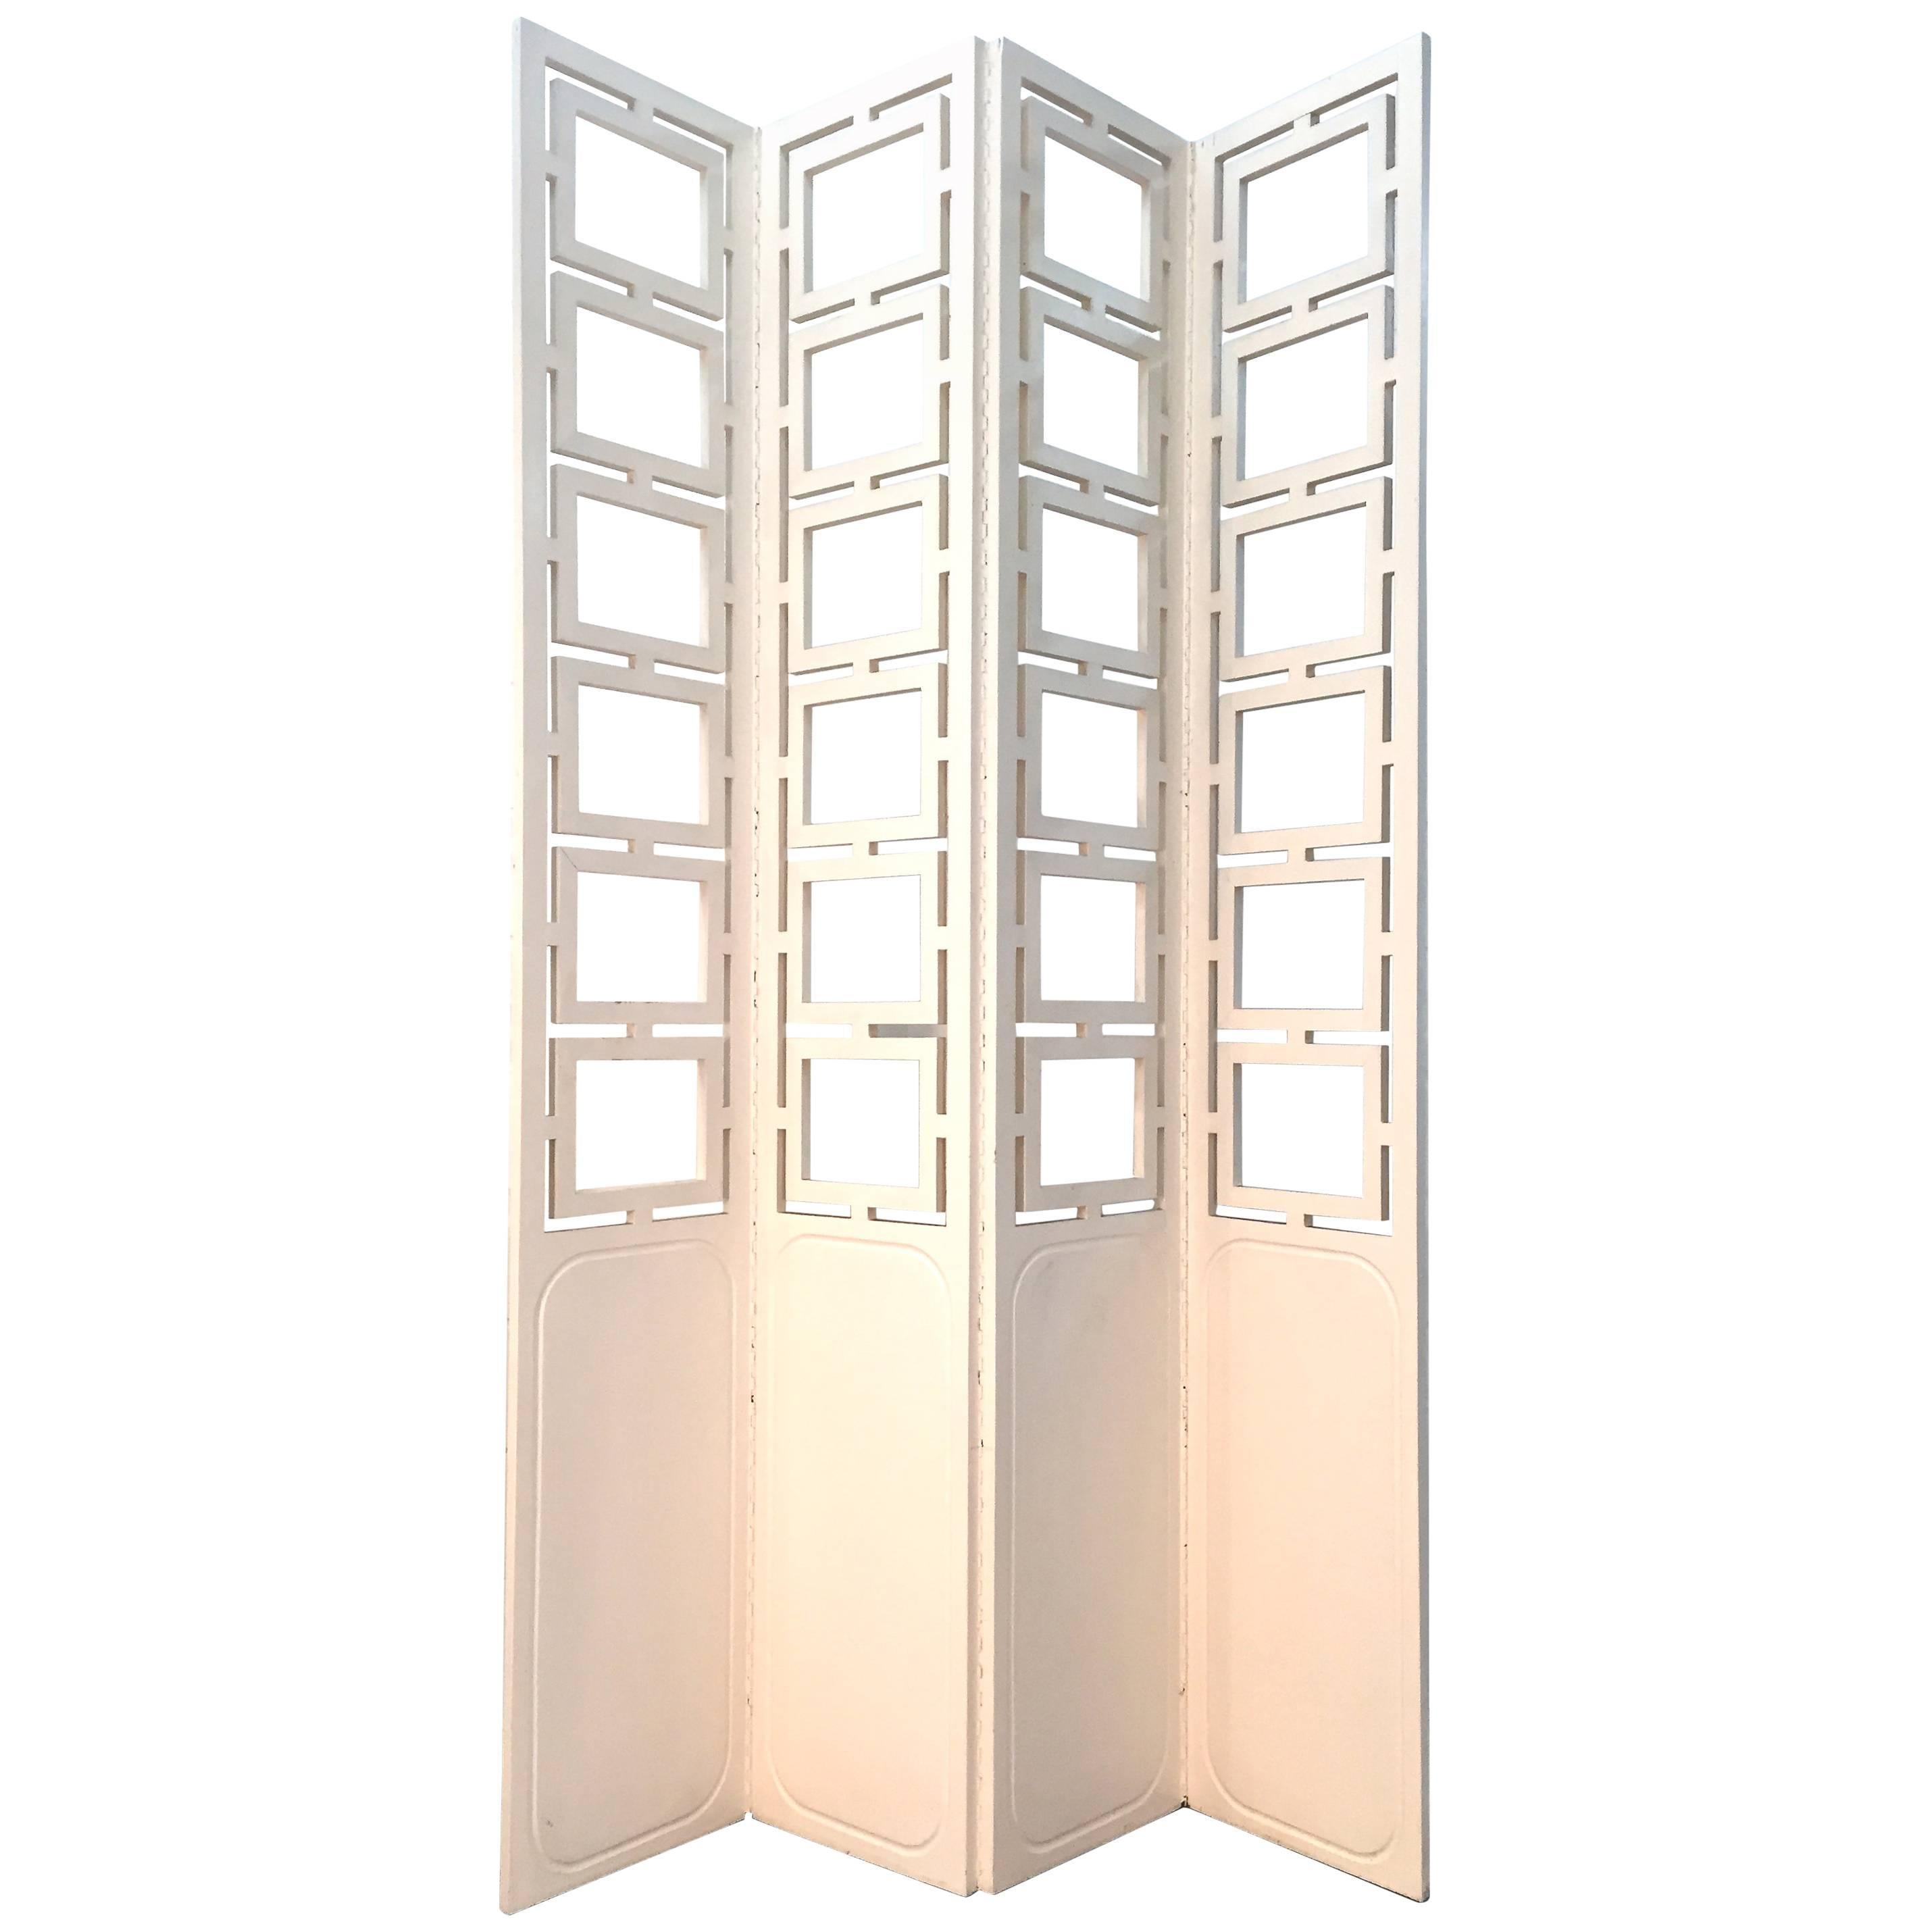 Decorative Four-Panel Screen or Room Divider For Sale